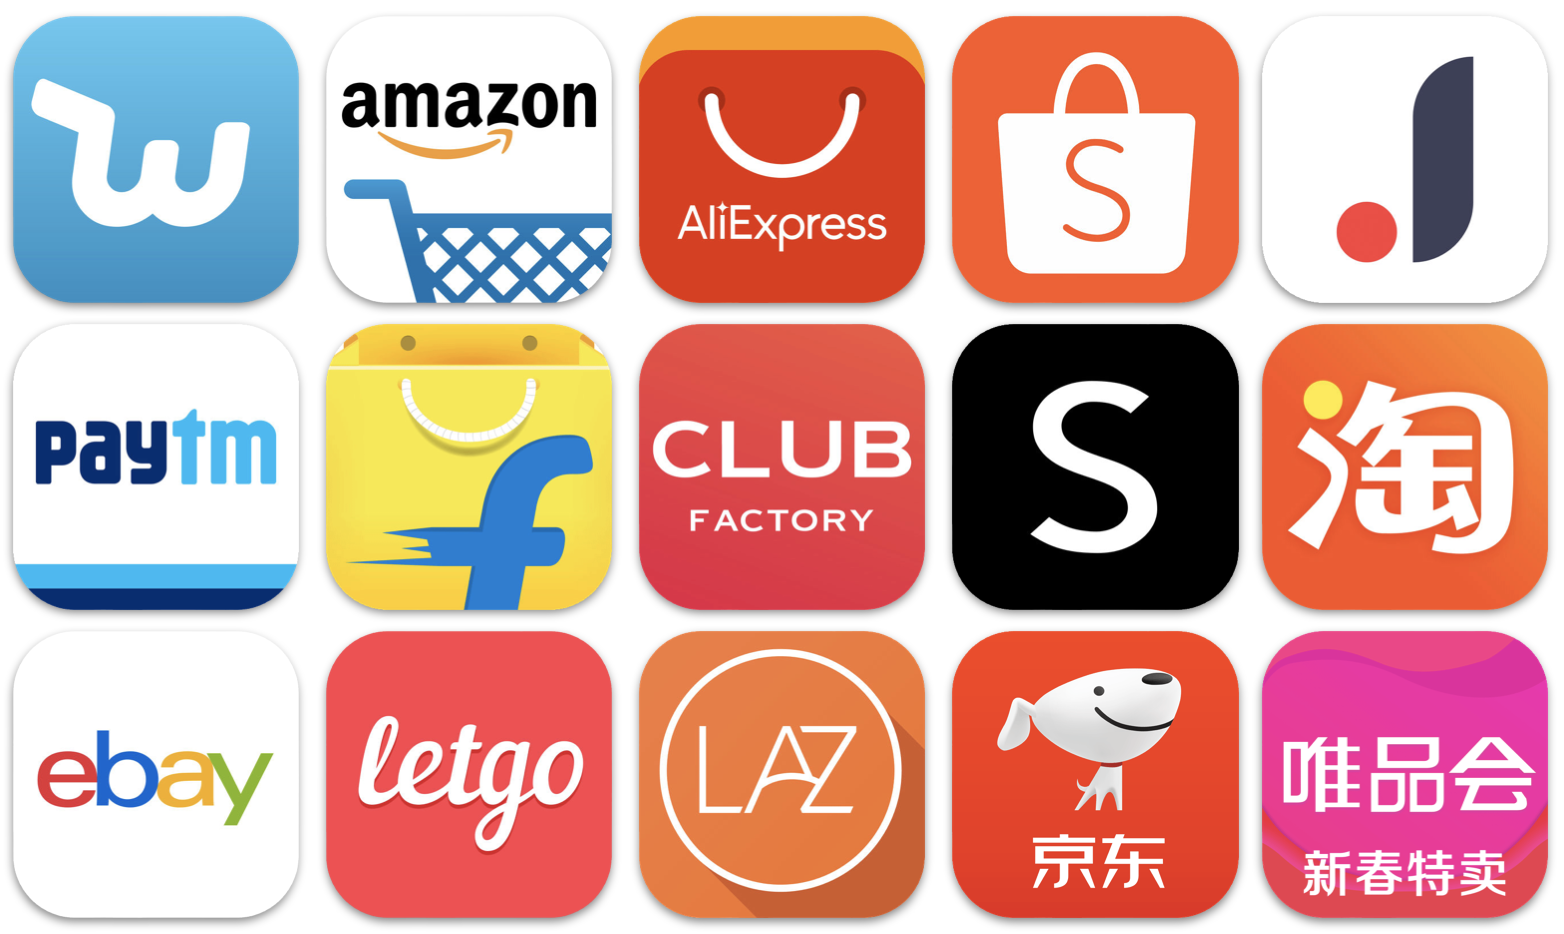 Top Shopping Apps Worldwide from 2015-2018